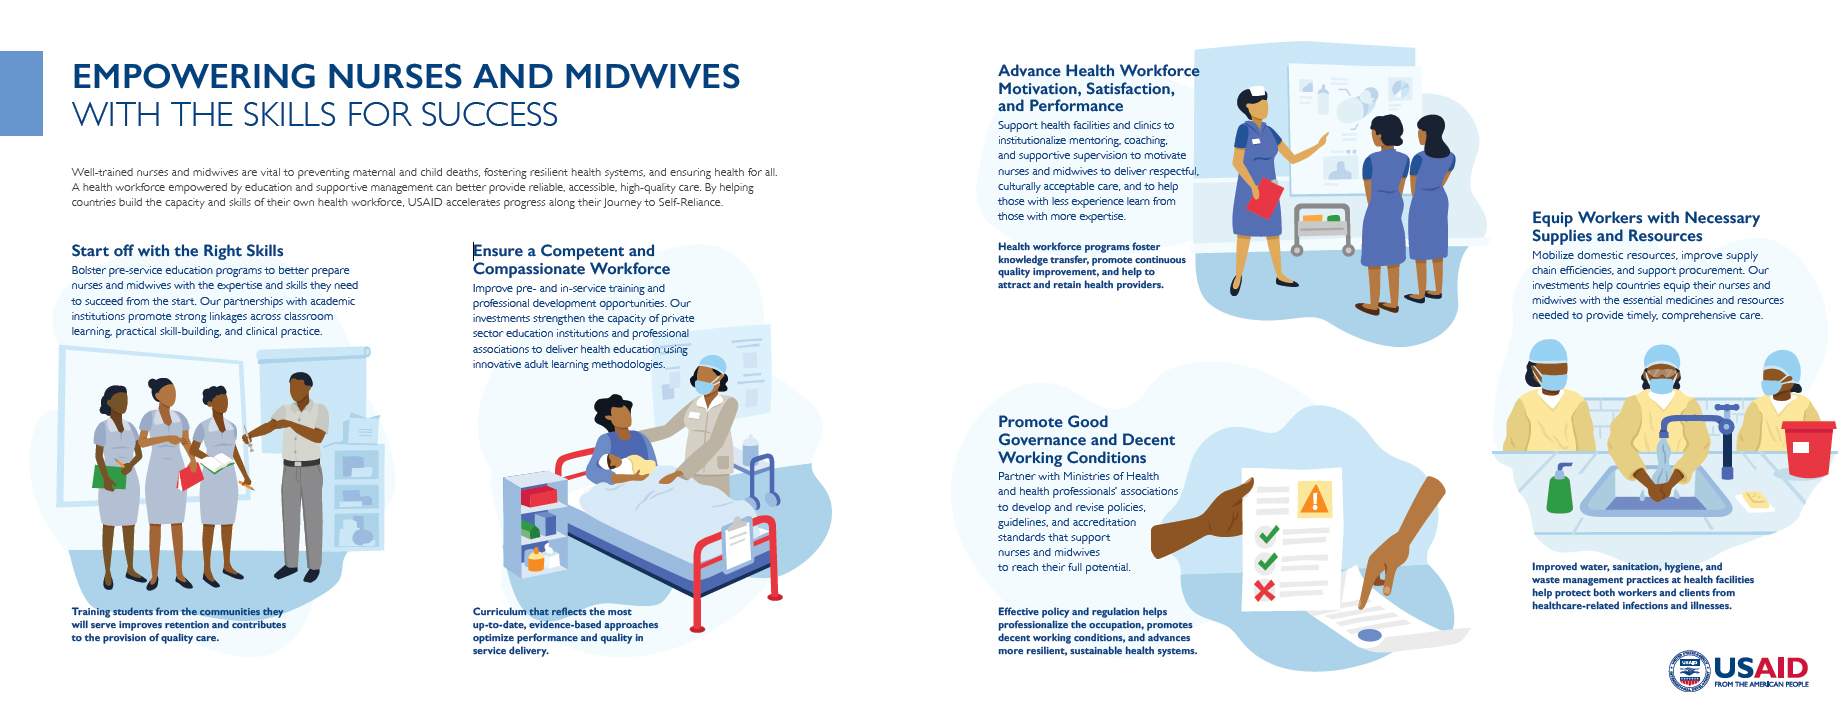 Empowering Nurses and Midwives with the Skills for Success